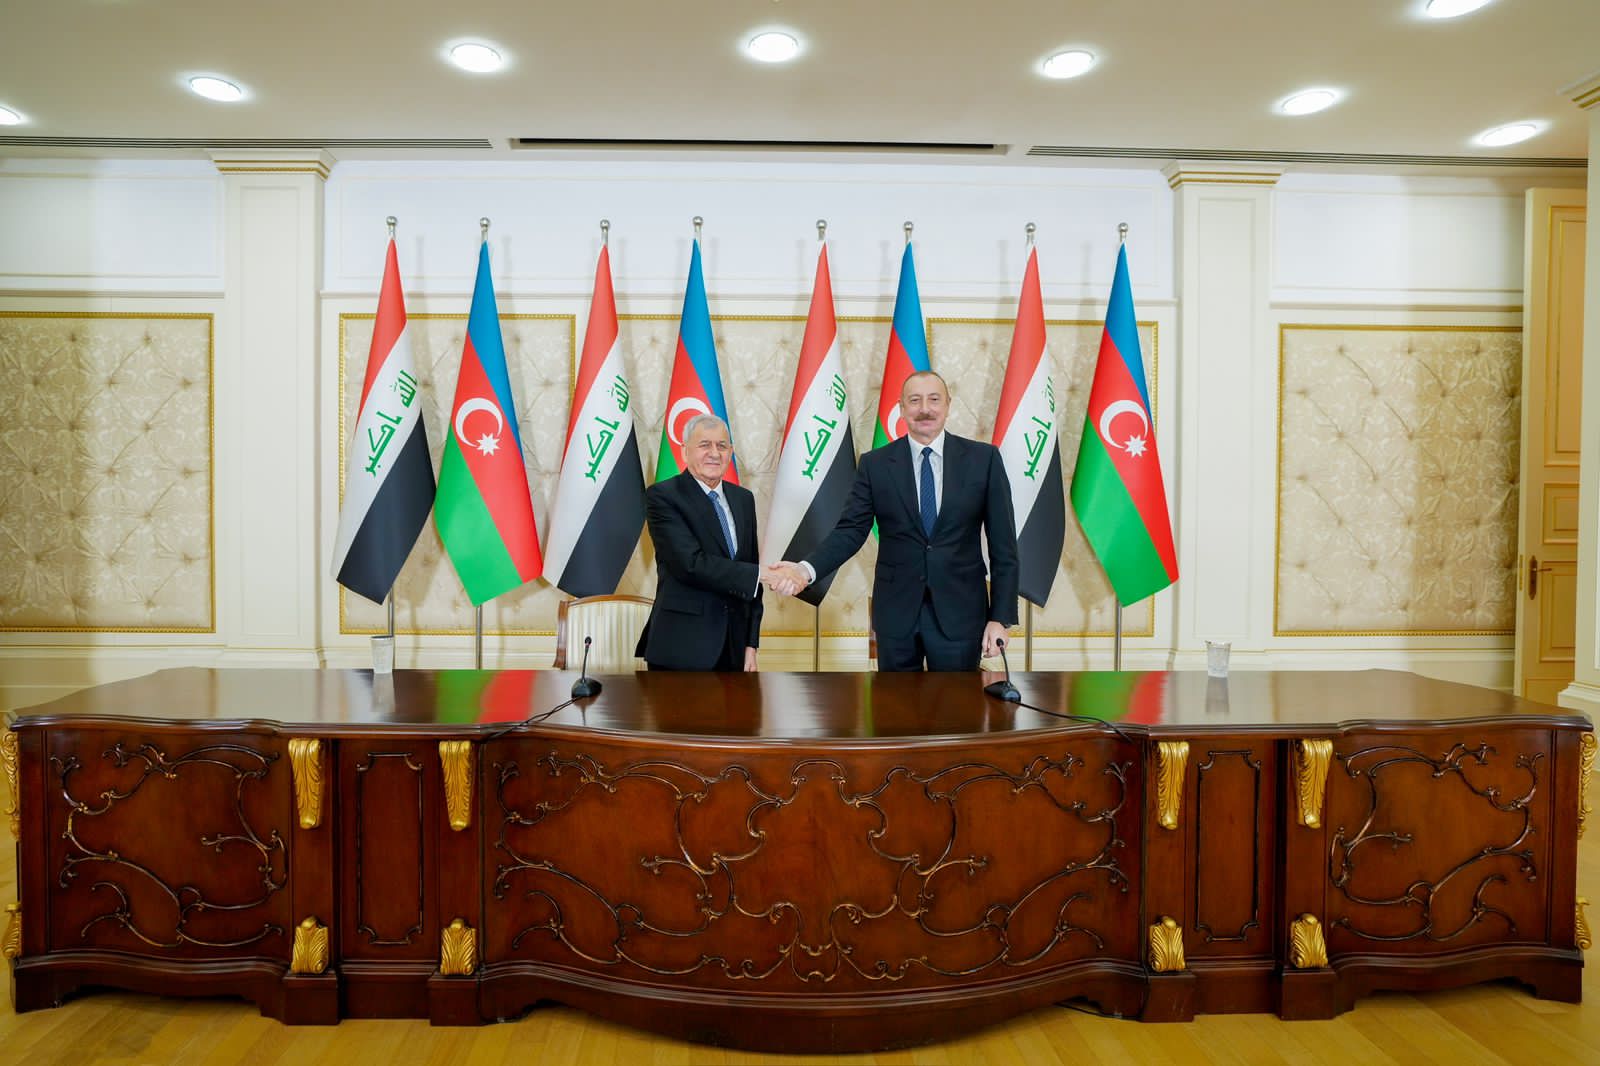 Iraq-Azerbaijan ties will lead to connection with Gulf, Mideast nations, Report